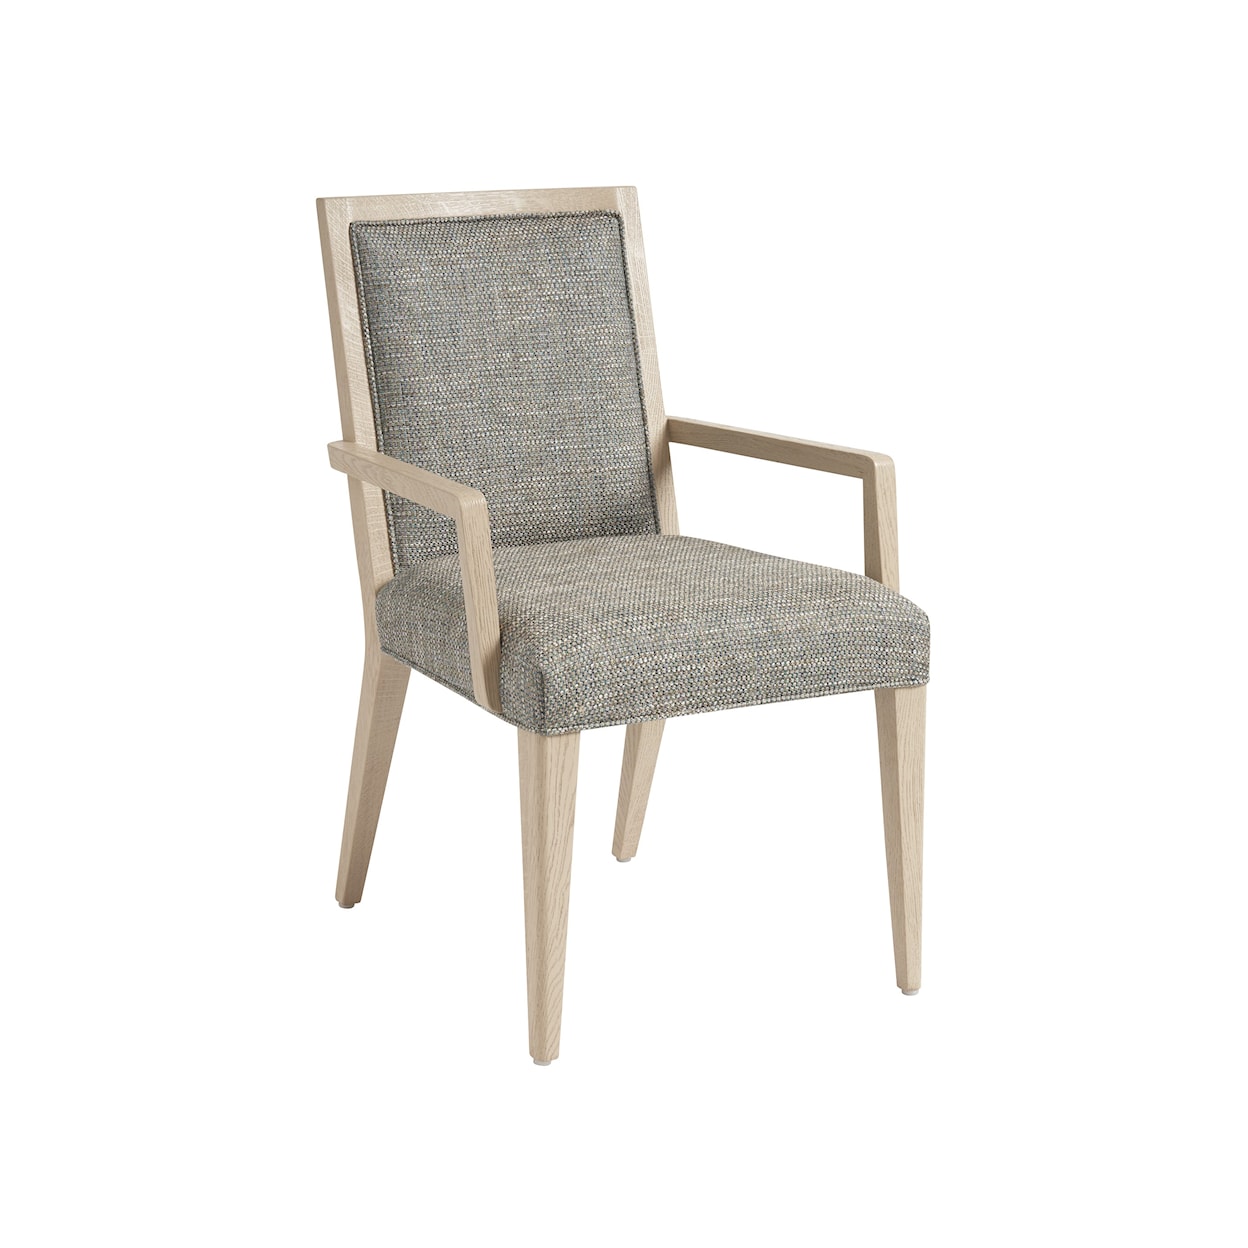 Tommy Bahama Home Sunset Key Nicholas Upholstered Arm Chair